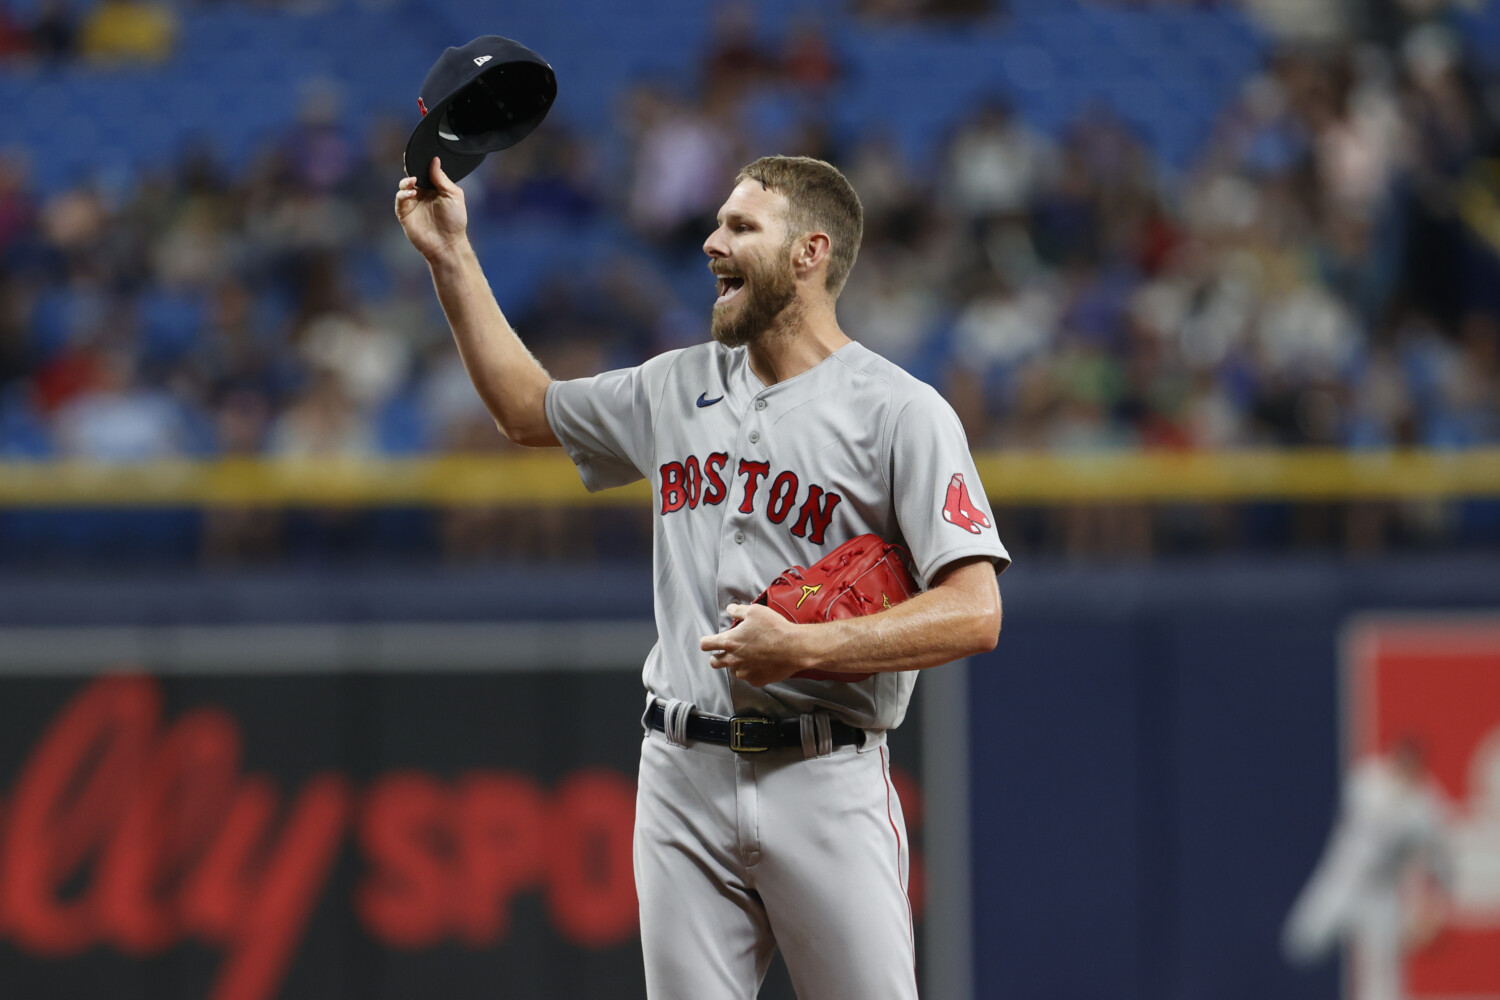 Tom Caron: Red Sox pitching depth helps to spark team's torrid June run